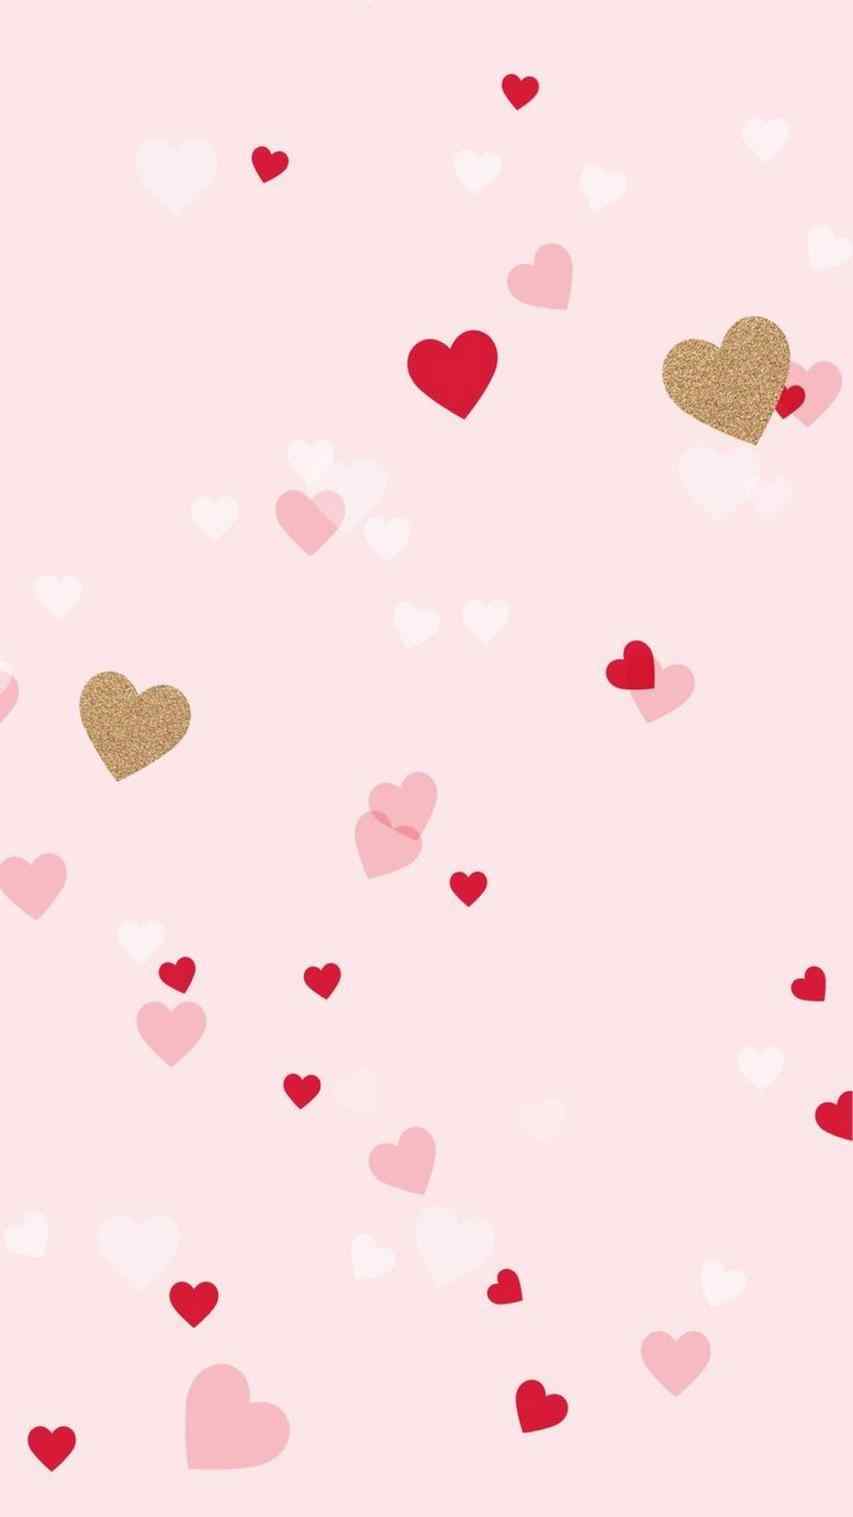 12 Super Cute Valentines Day iPhone Wallpapers  Preppy Wallpapers  Valentines  wallpaper iphone Valentines wallpaper Iphone wallpaper preppy